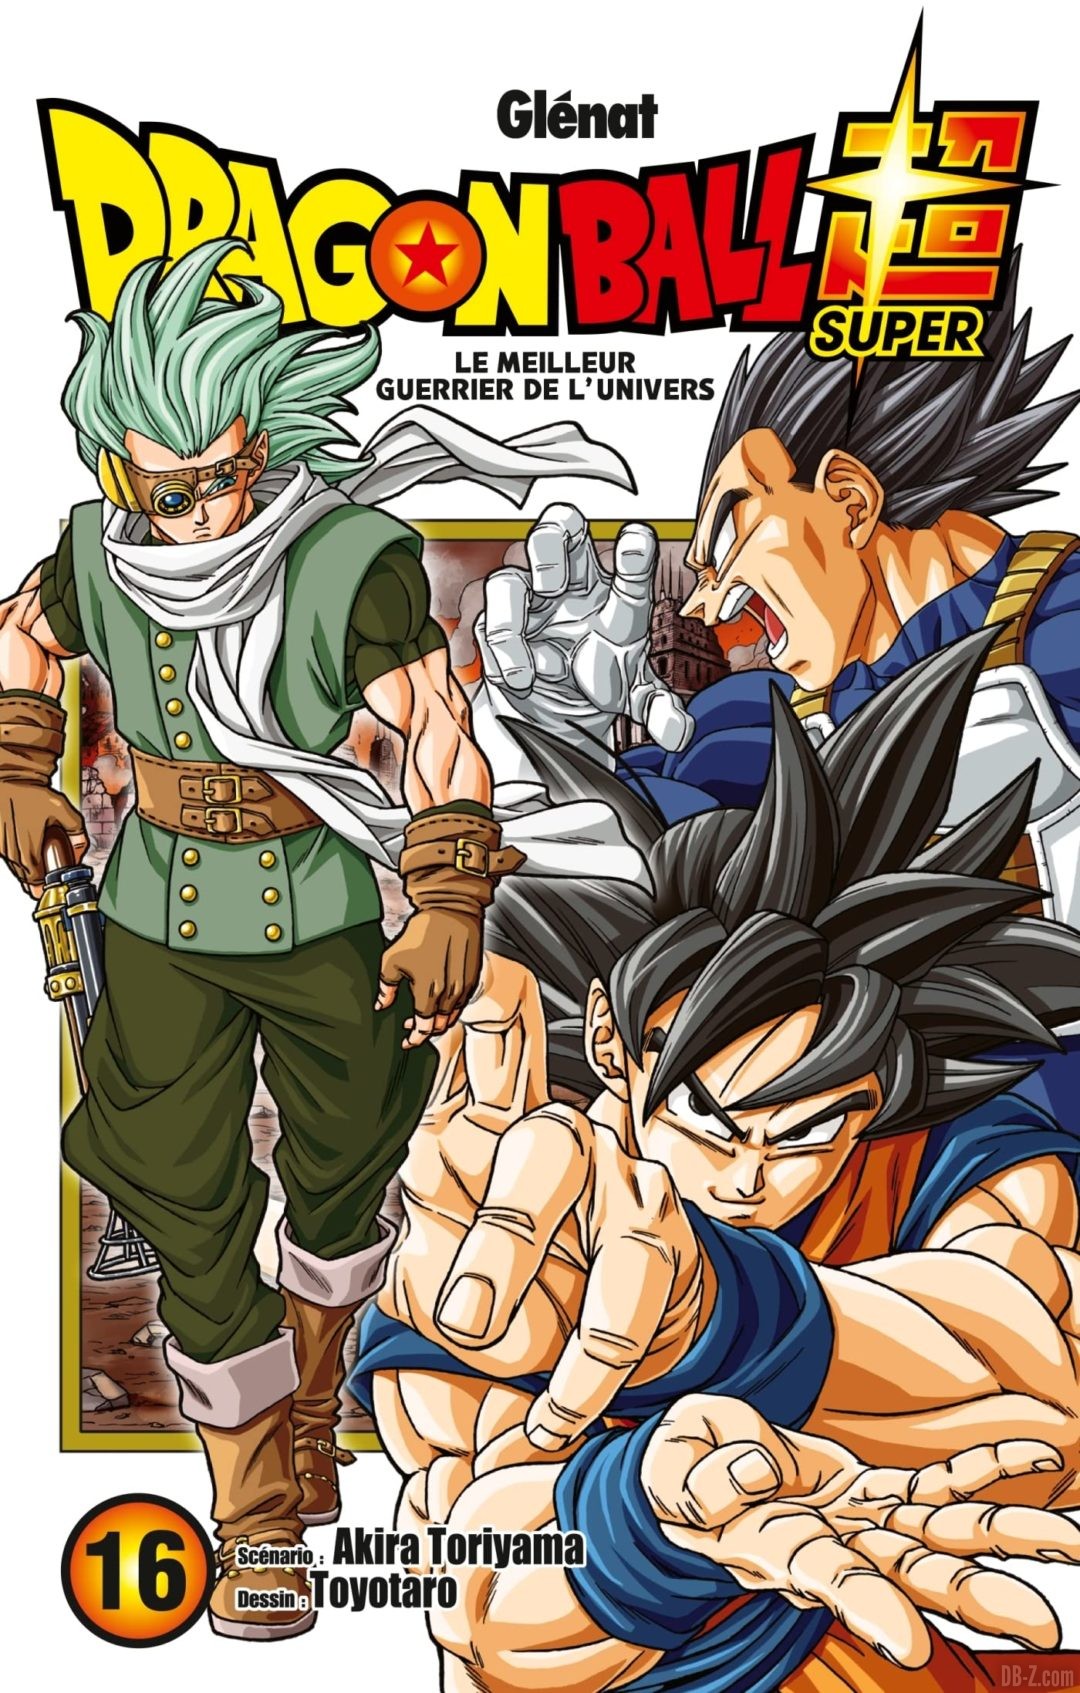 cover francaise tome 16 draogn ball super vf